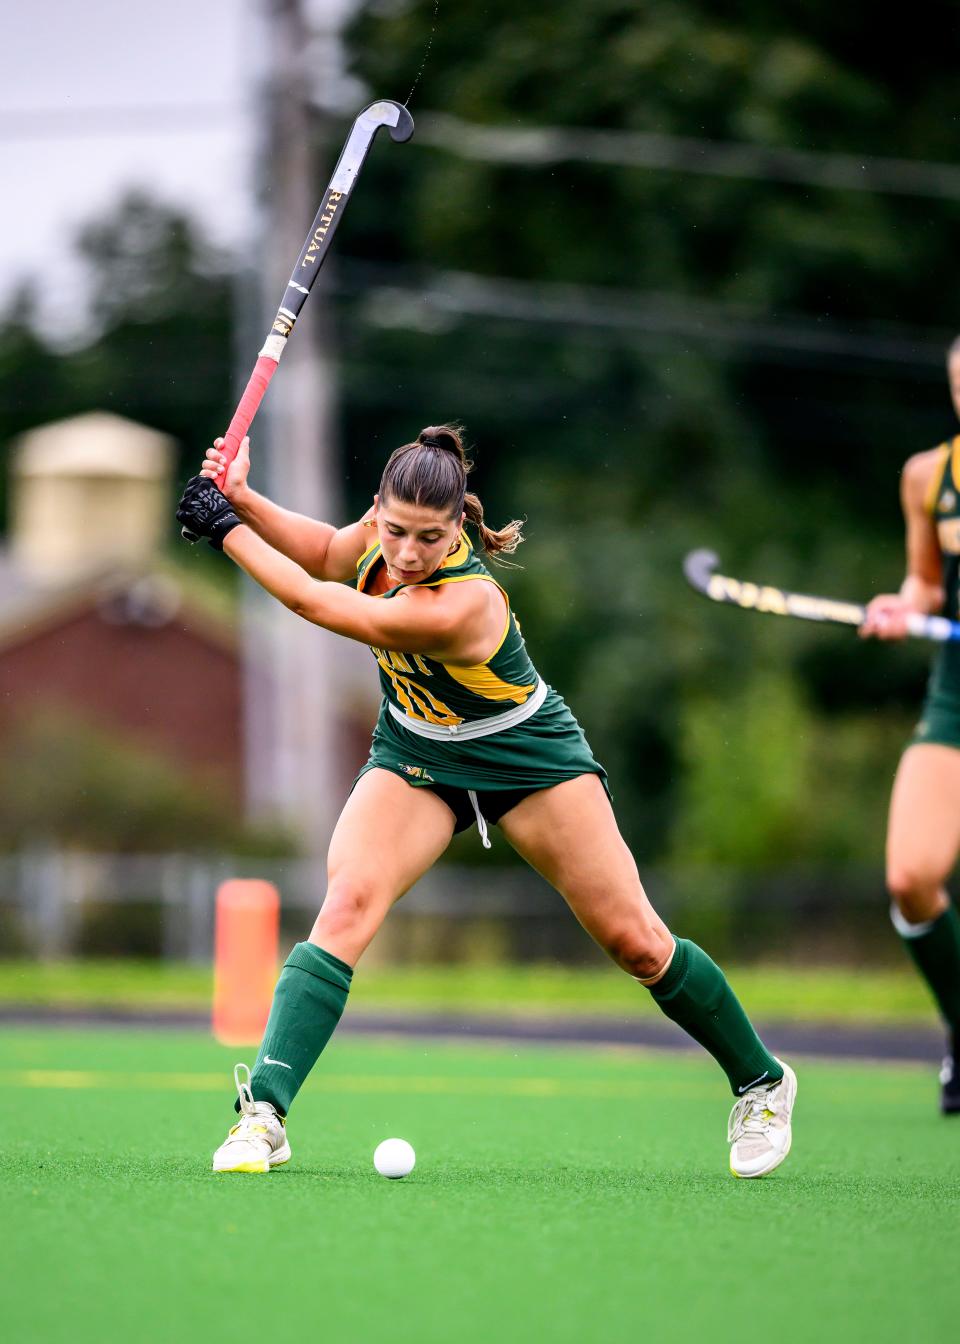 Former Oakmont Regional field hockey star Maddie Moran winds up for a shot during a recent game for the University of Vermont.